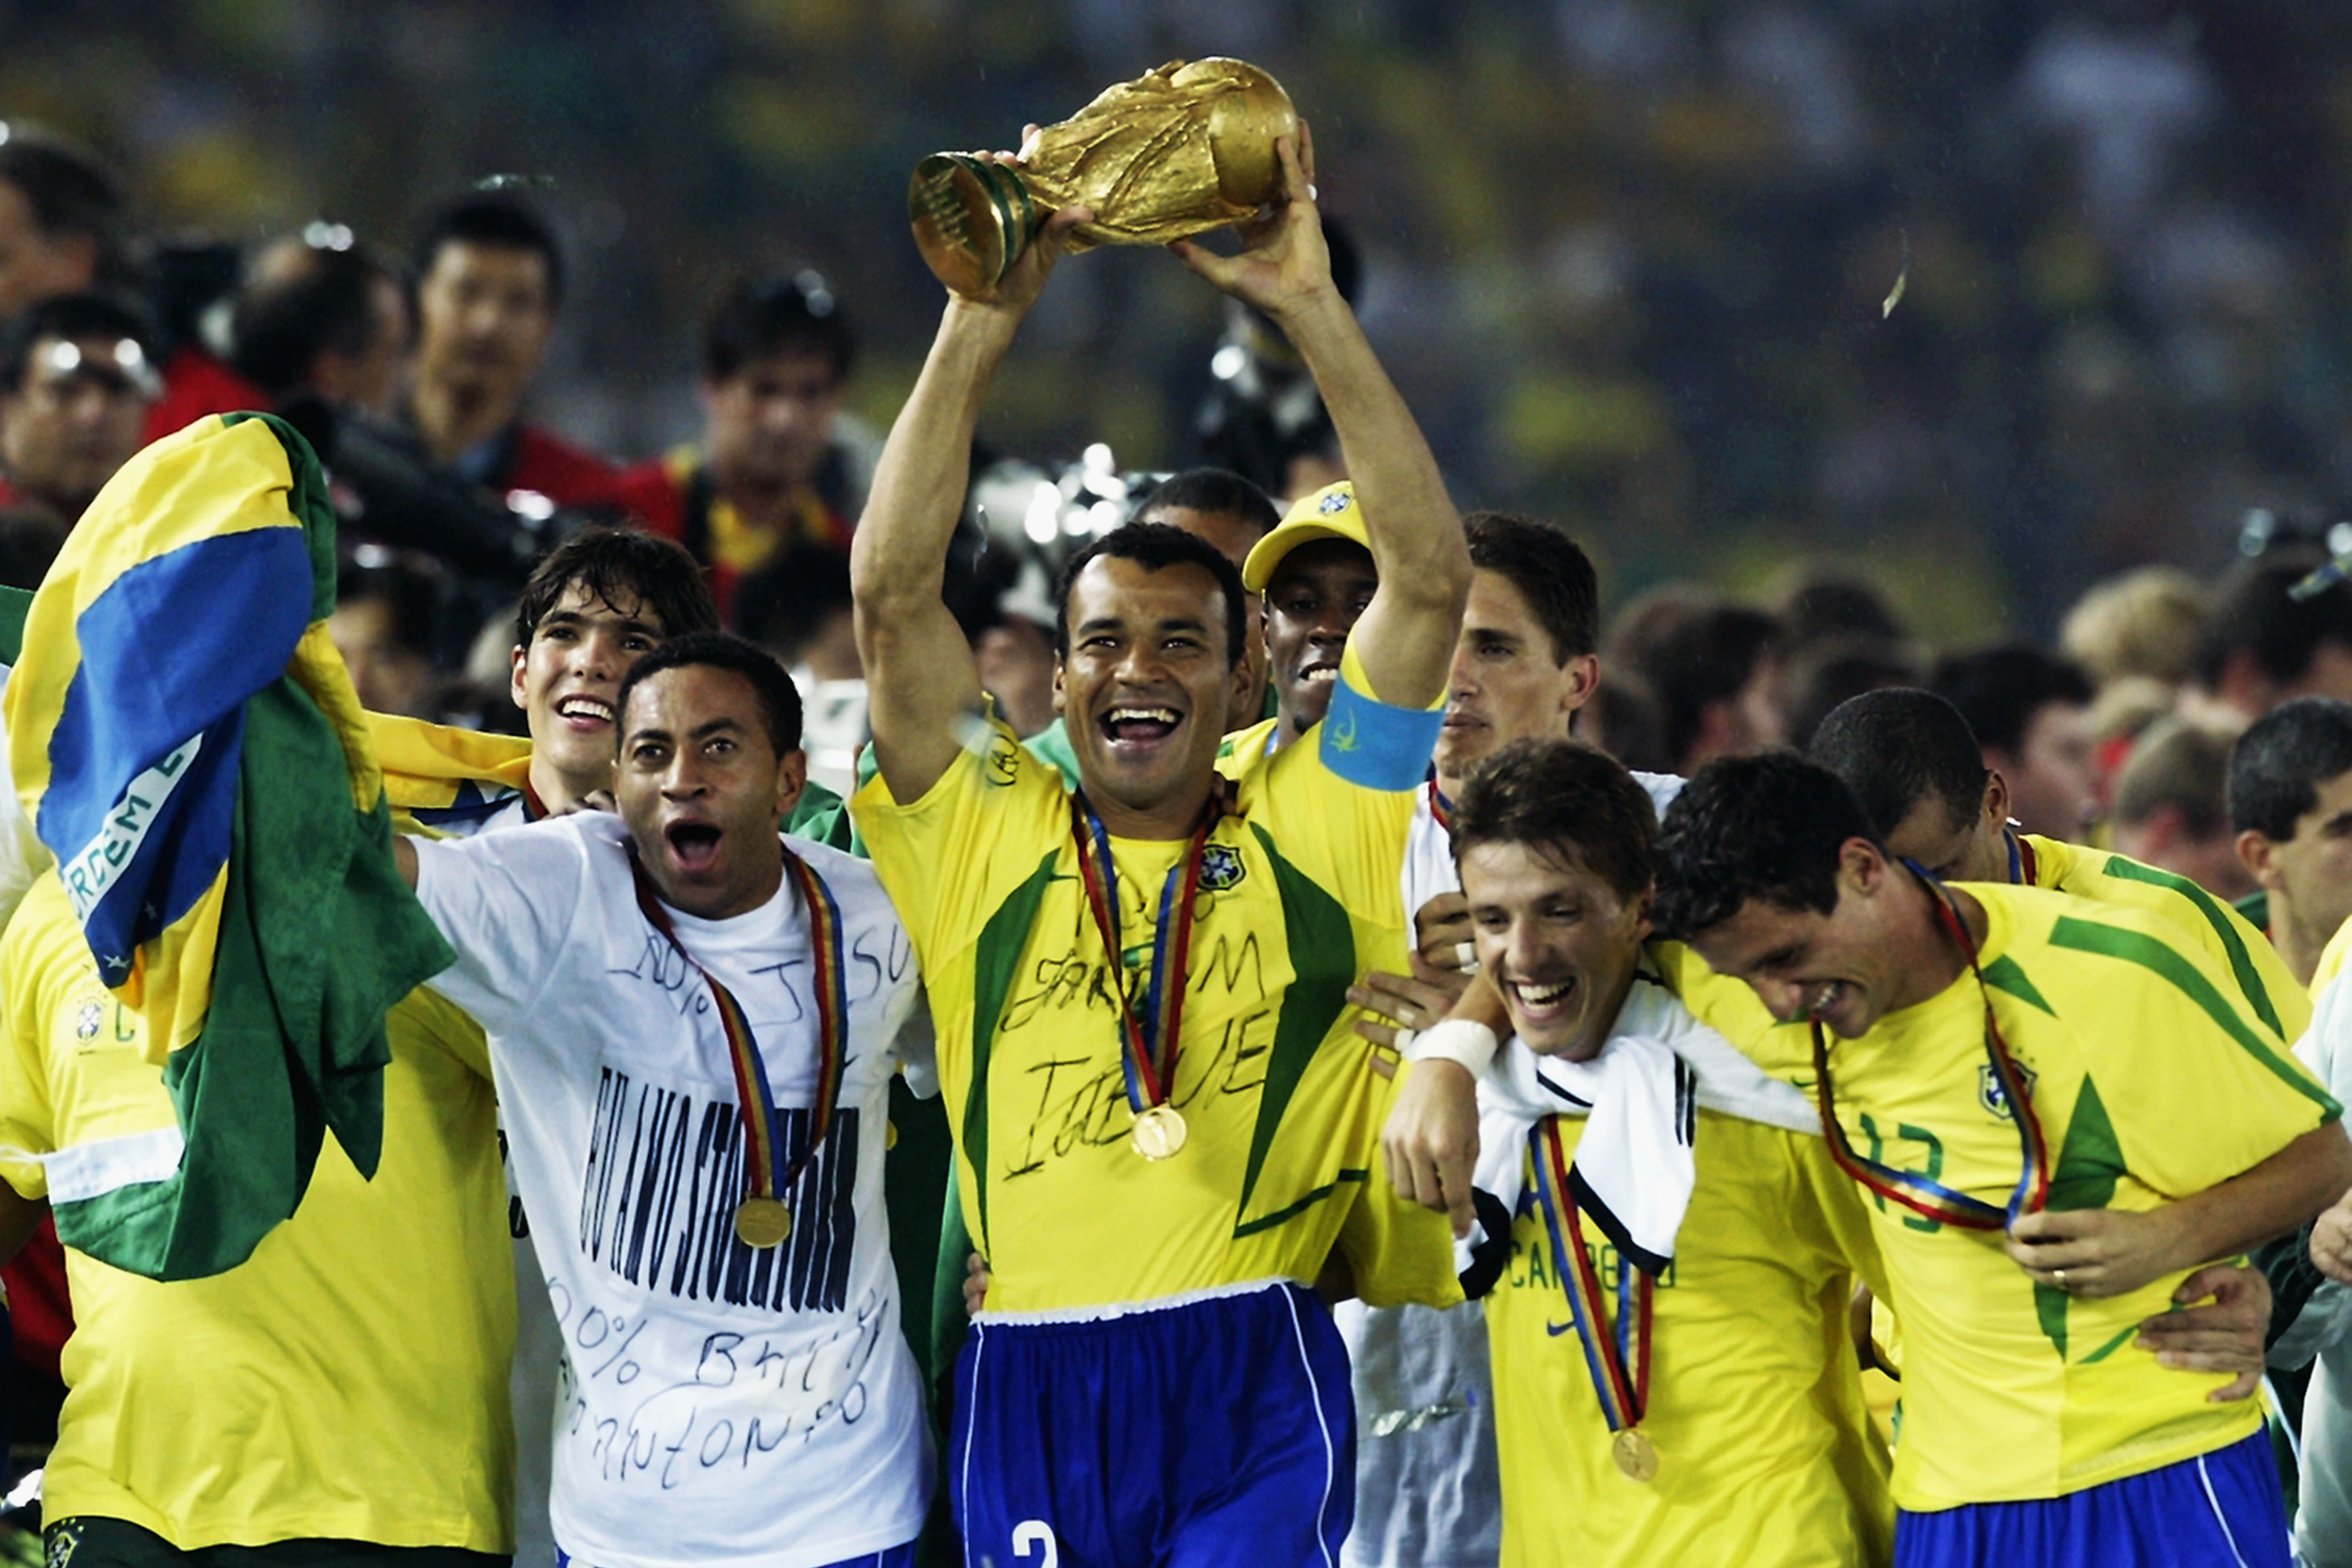 Brazil's 2002 World Cup winning team - Who were the players and